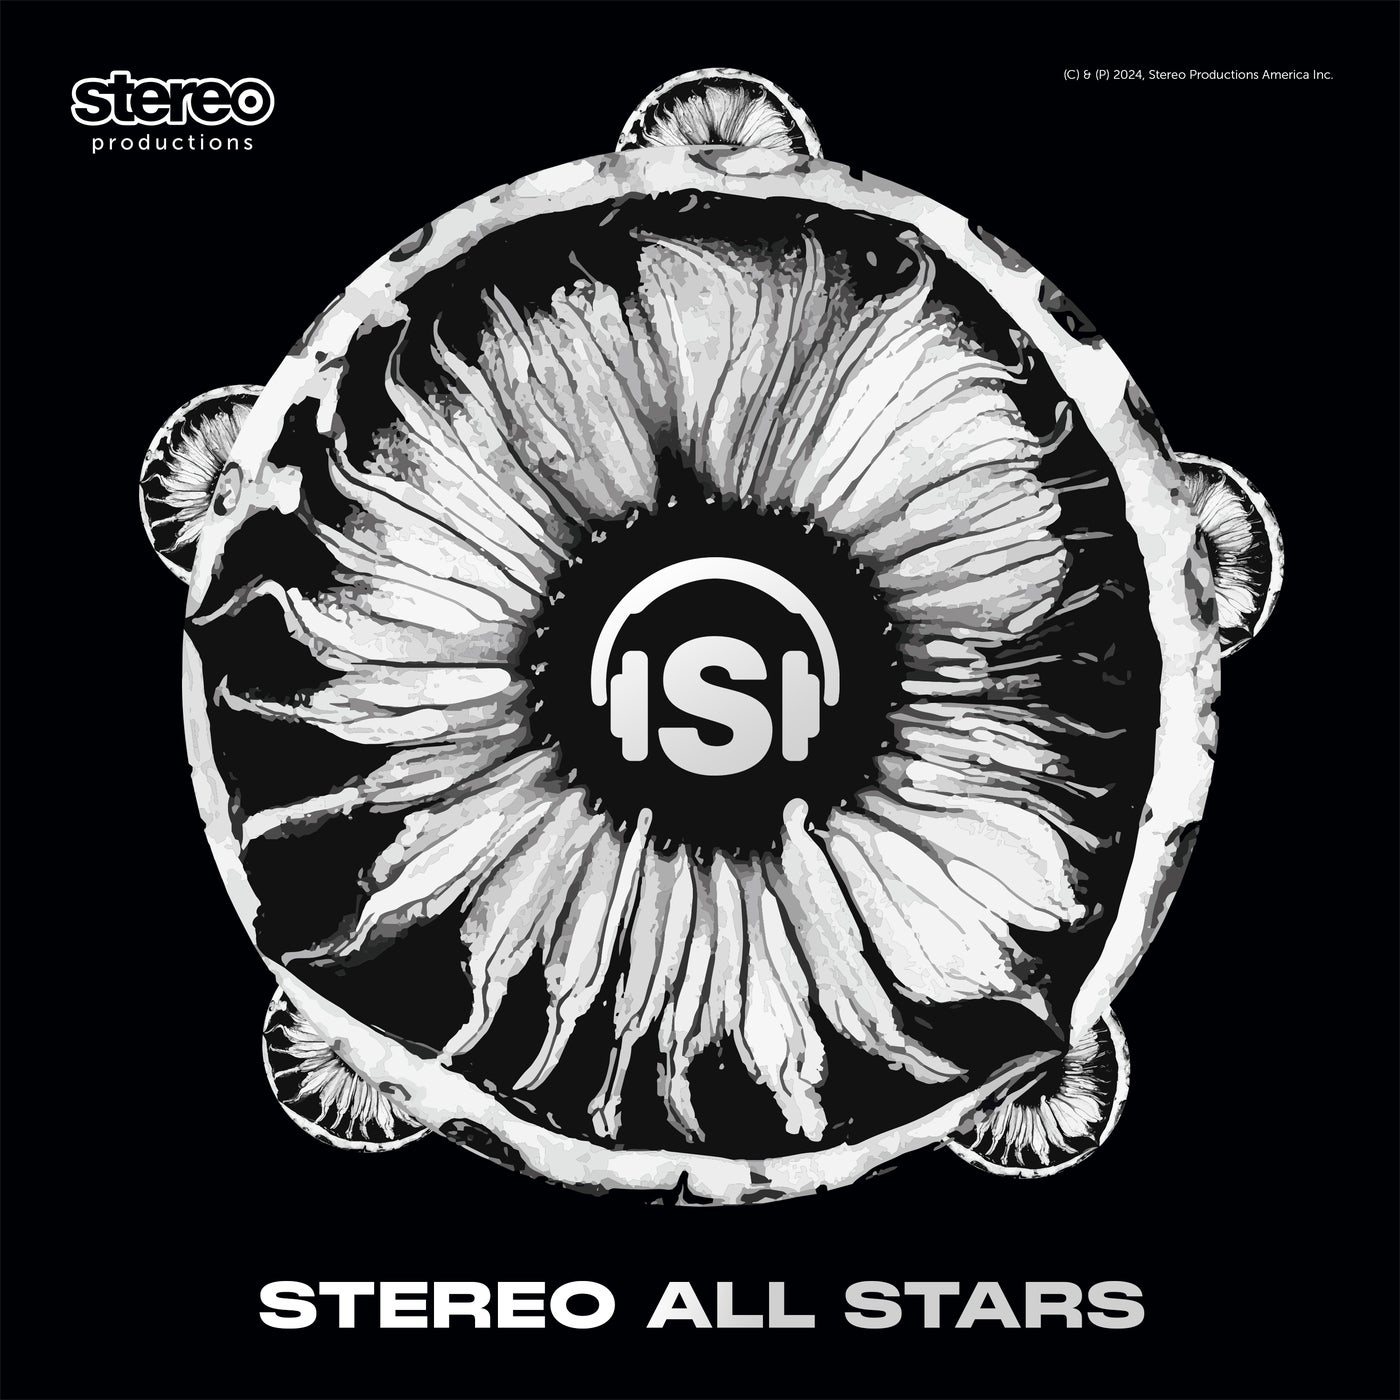 image cover: VA - Stereo All Stars on Stereo Productions